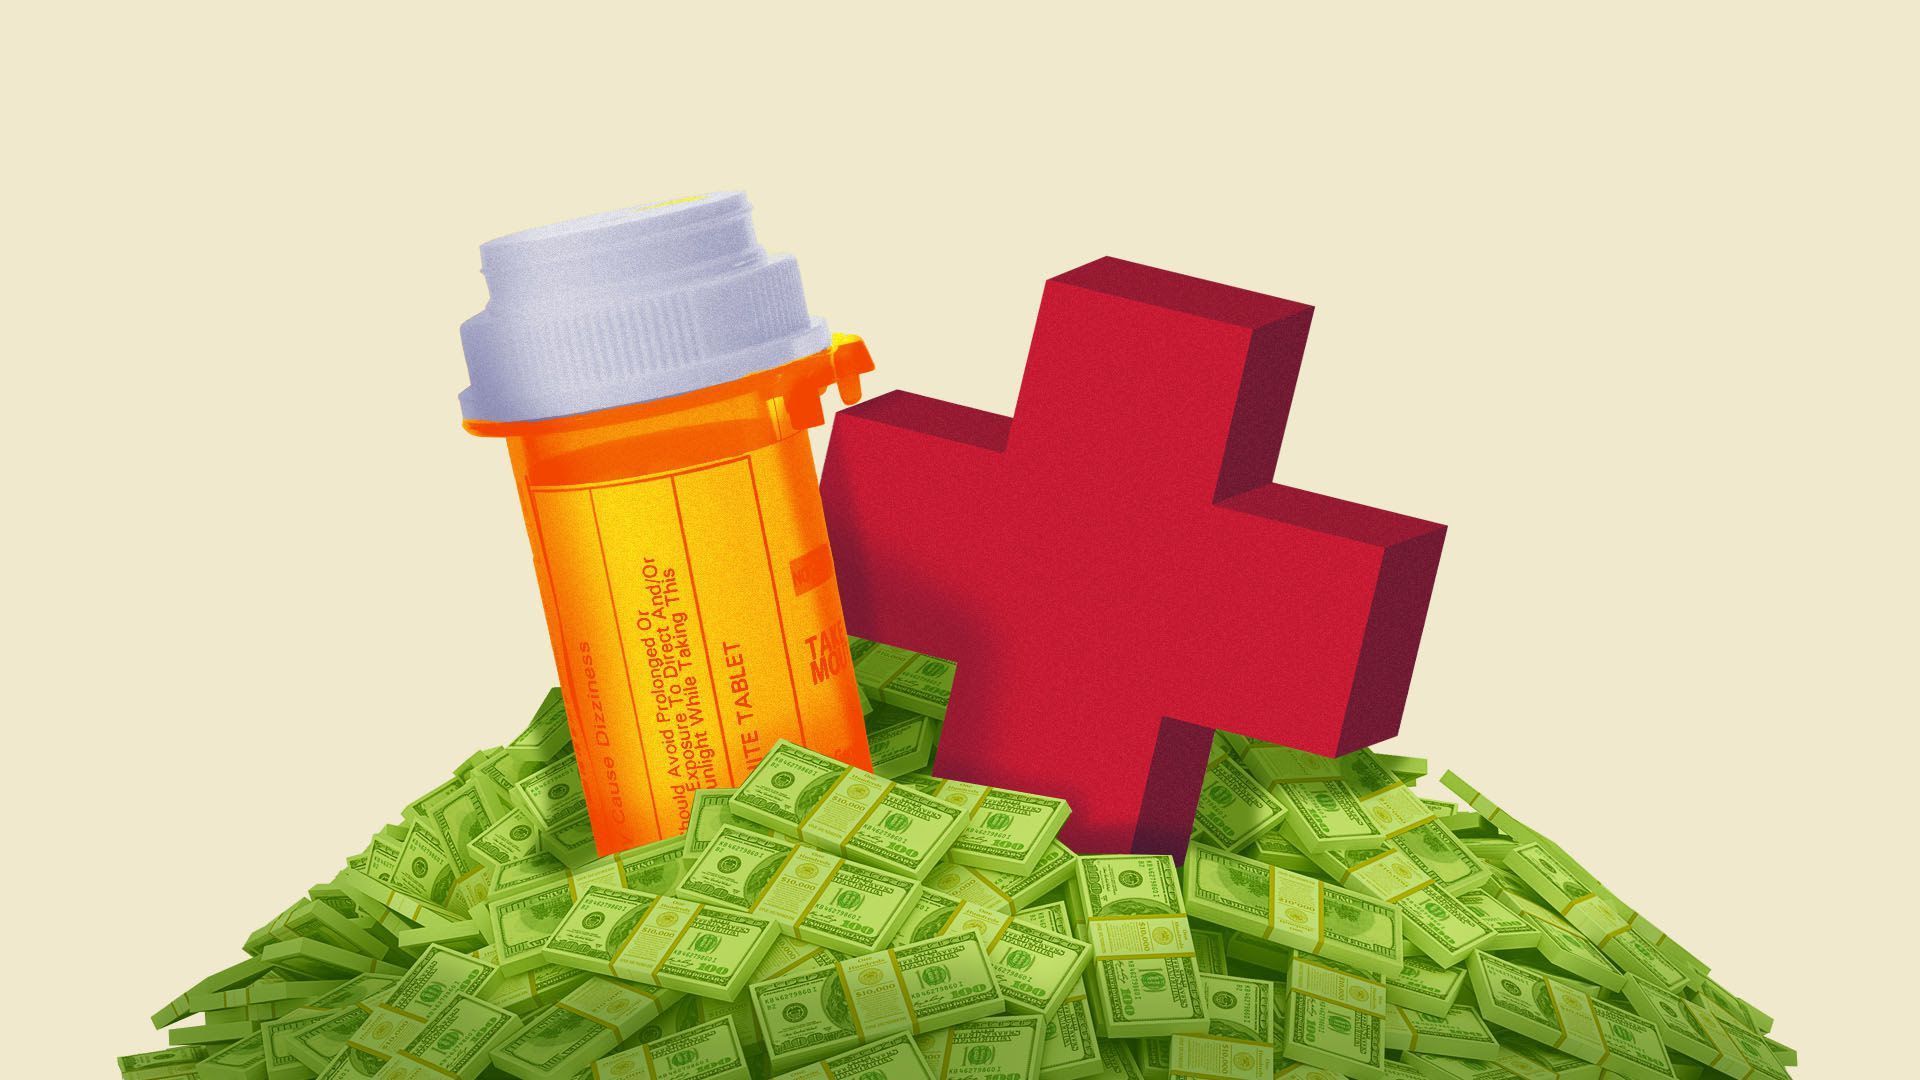 Illustration of a pill bottle, a red cross and a pile of money.